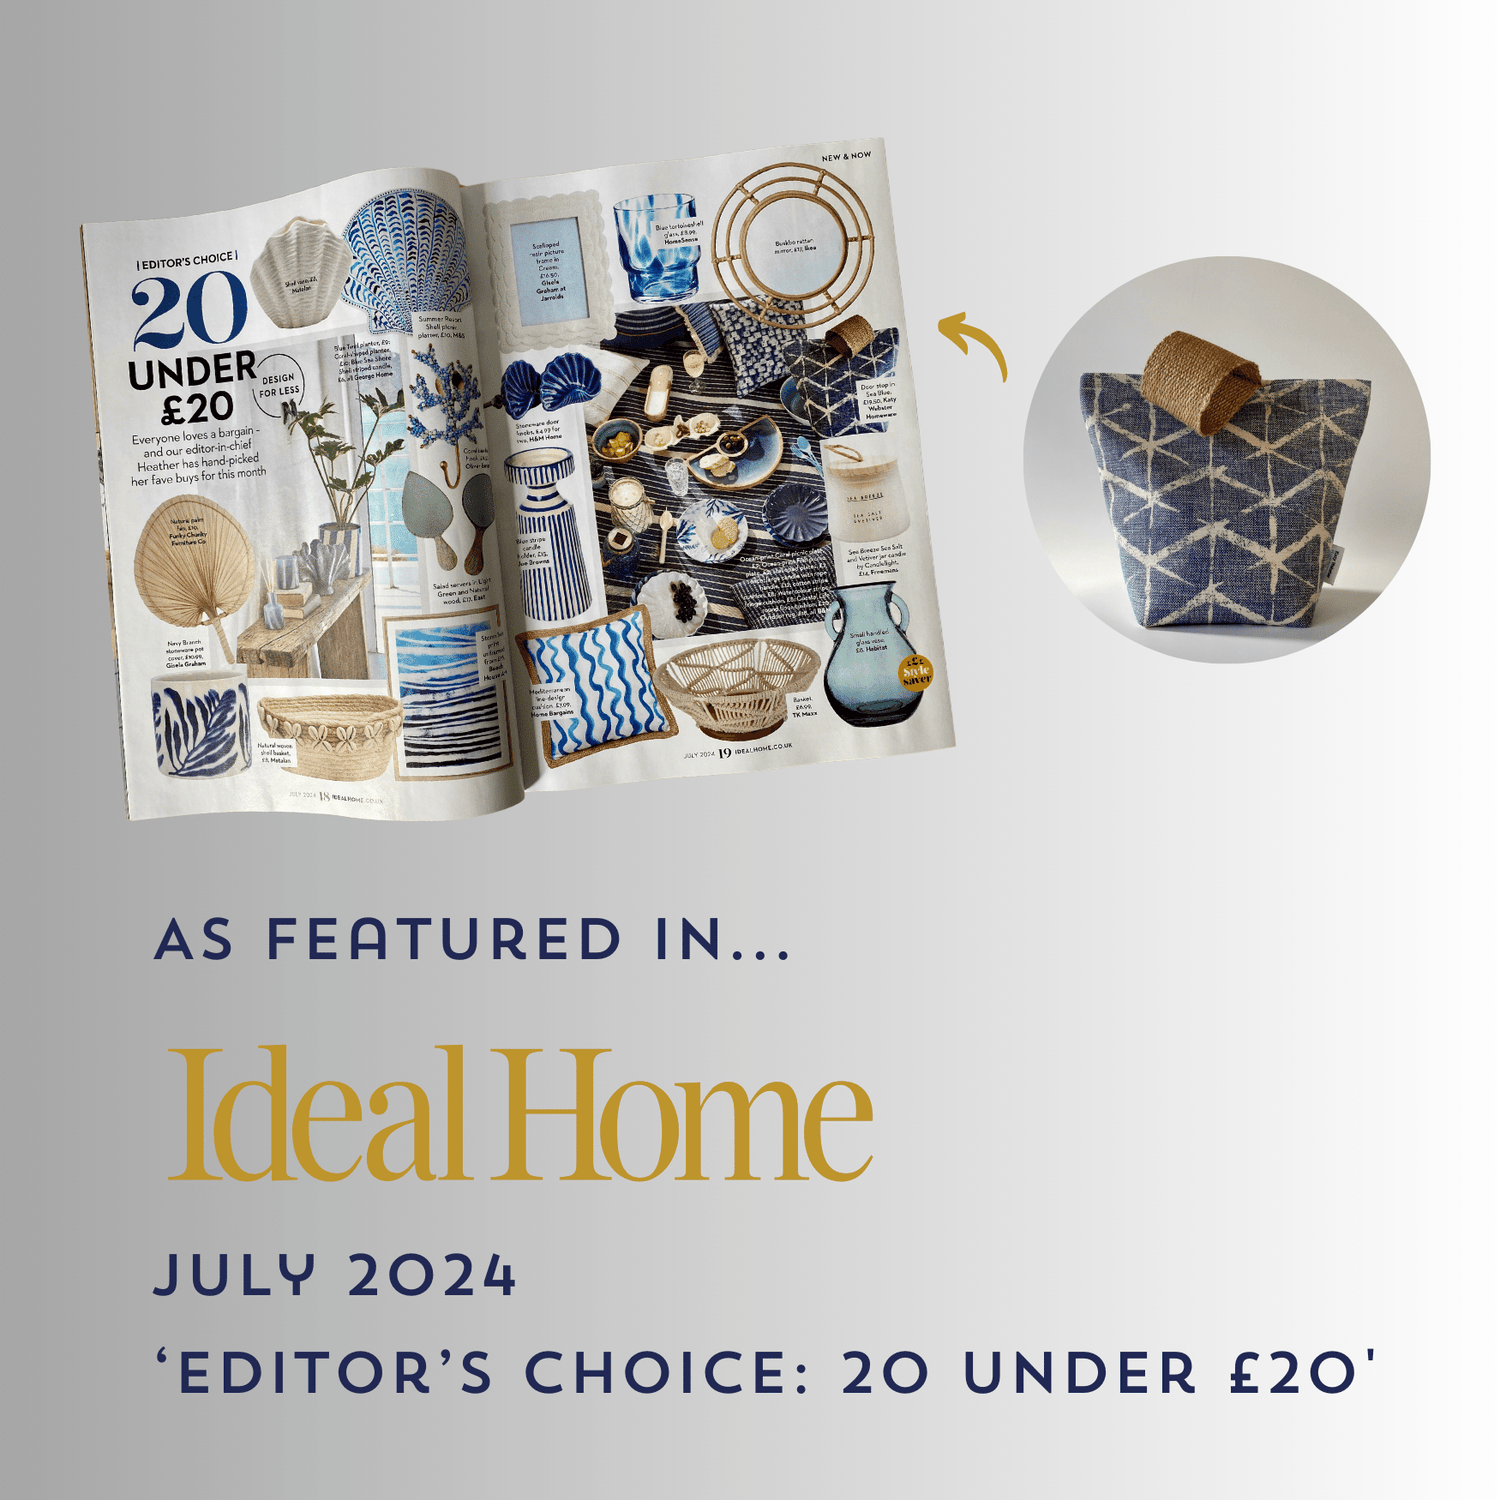 Katy Webster Homeware Blue Fabric Door Stop as featured in Ideal Home Magazine July 2024